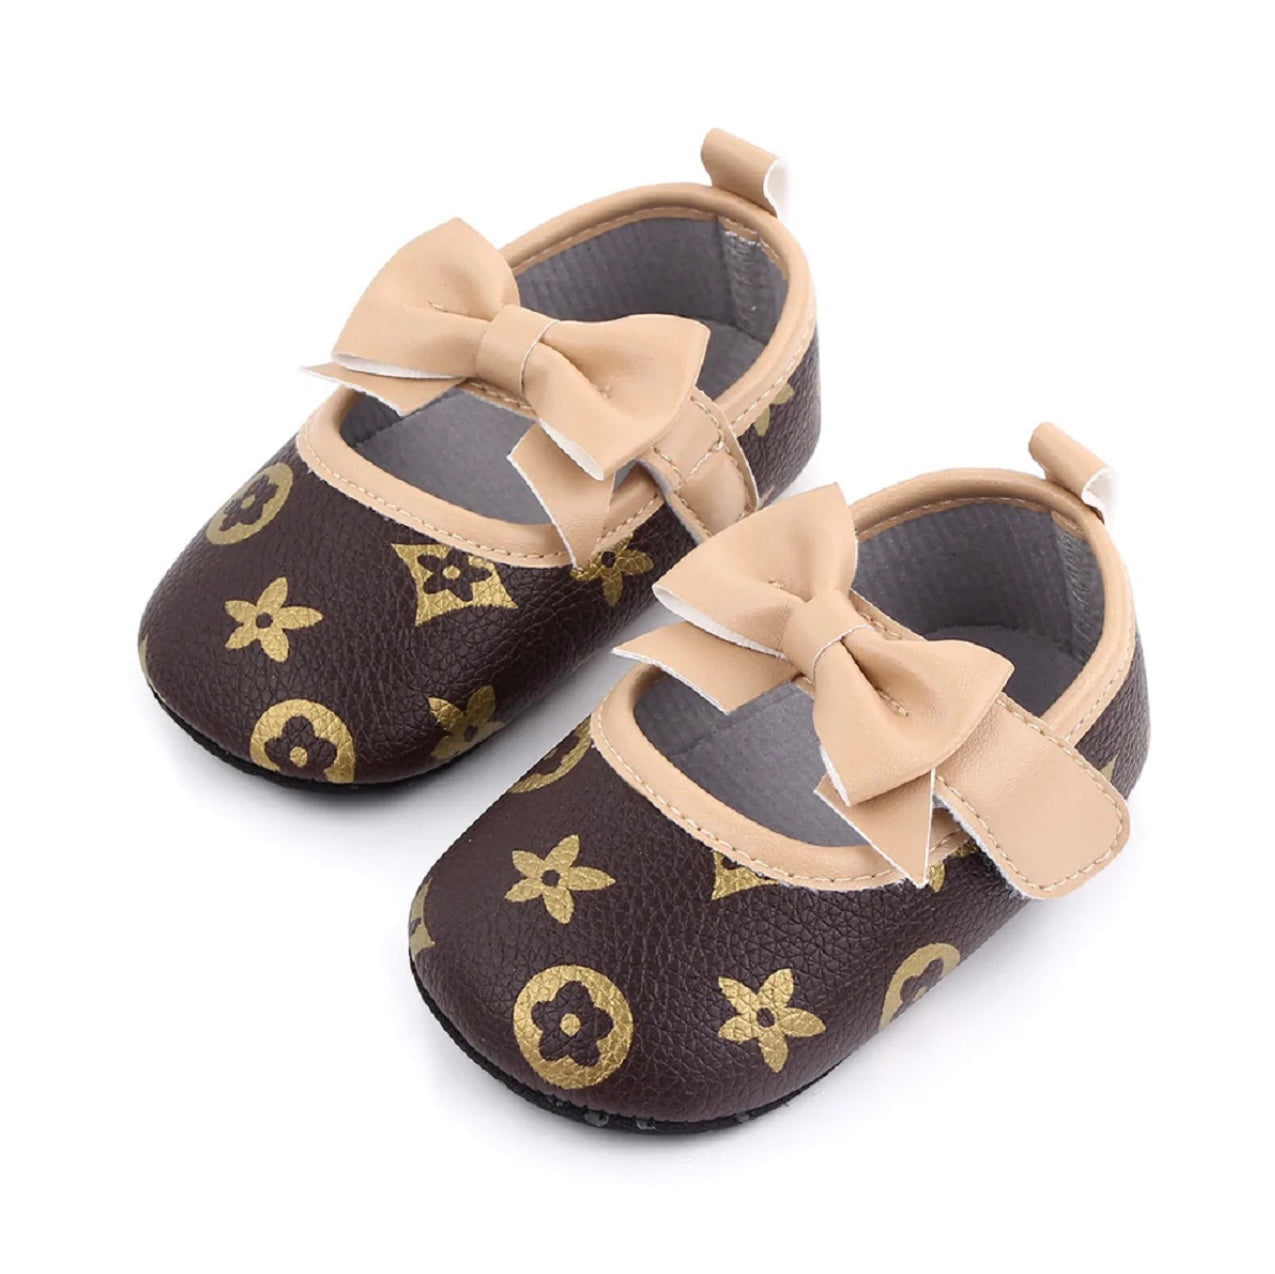 LV Inspired Toddler Shoes😍💋 - Chic & Unique Kids Boutique